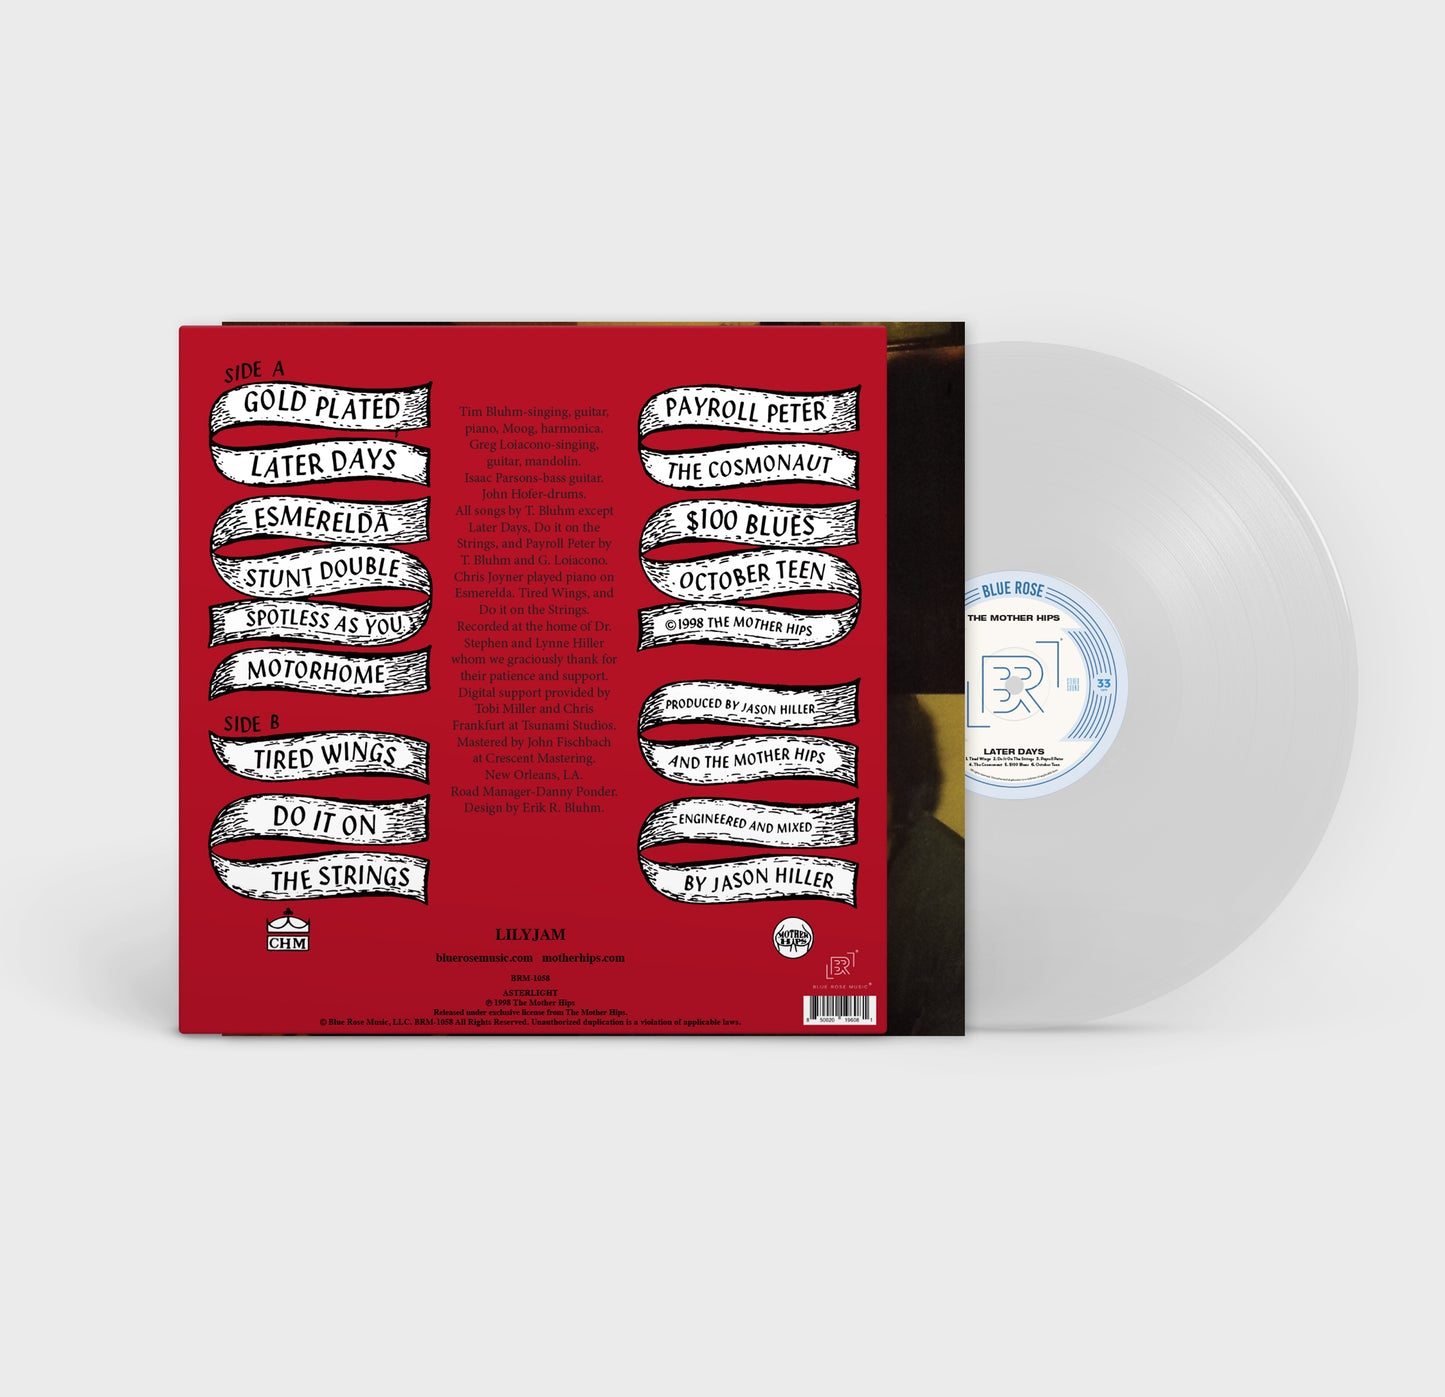 The Mother Hips - "Later Days" Limited Edition, Clear Vinyl